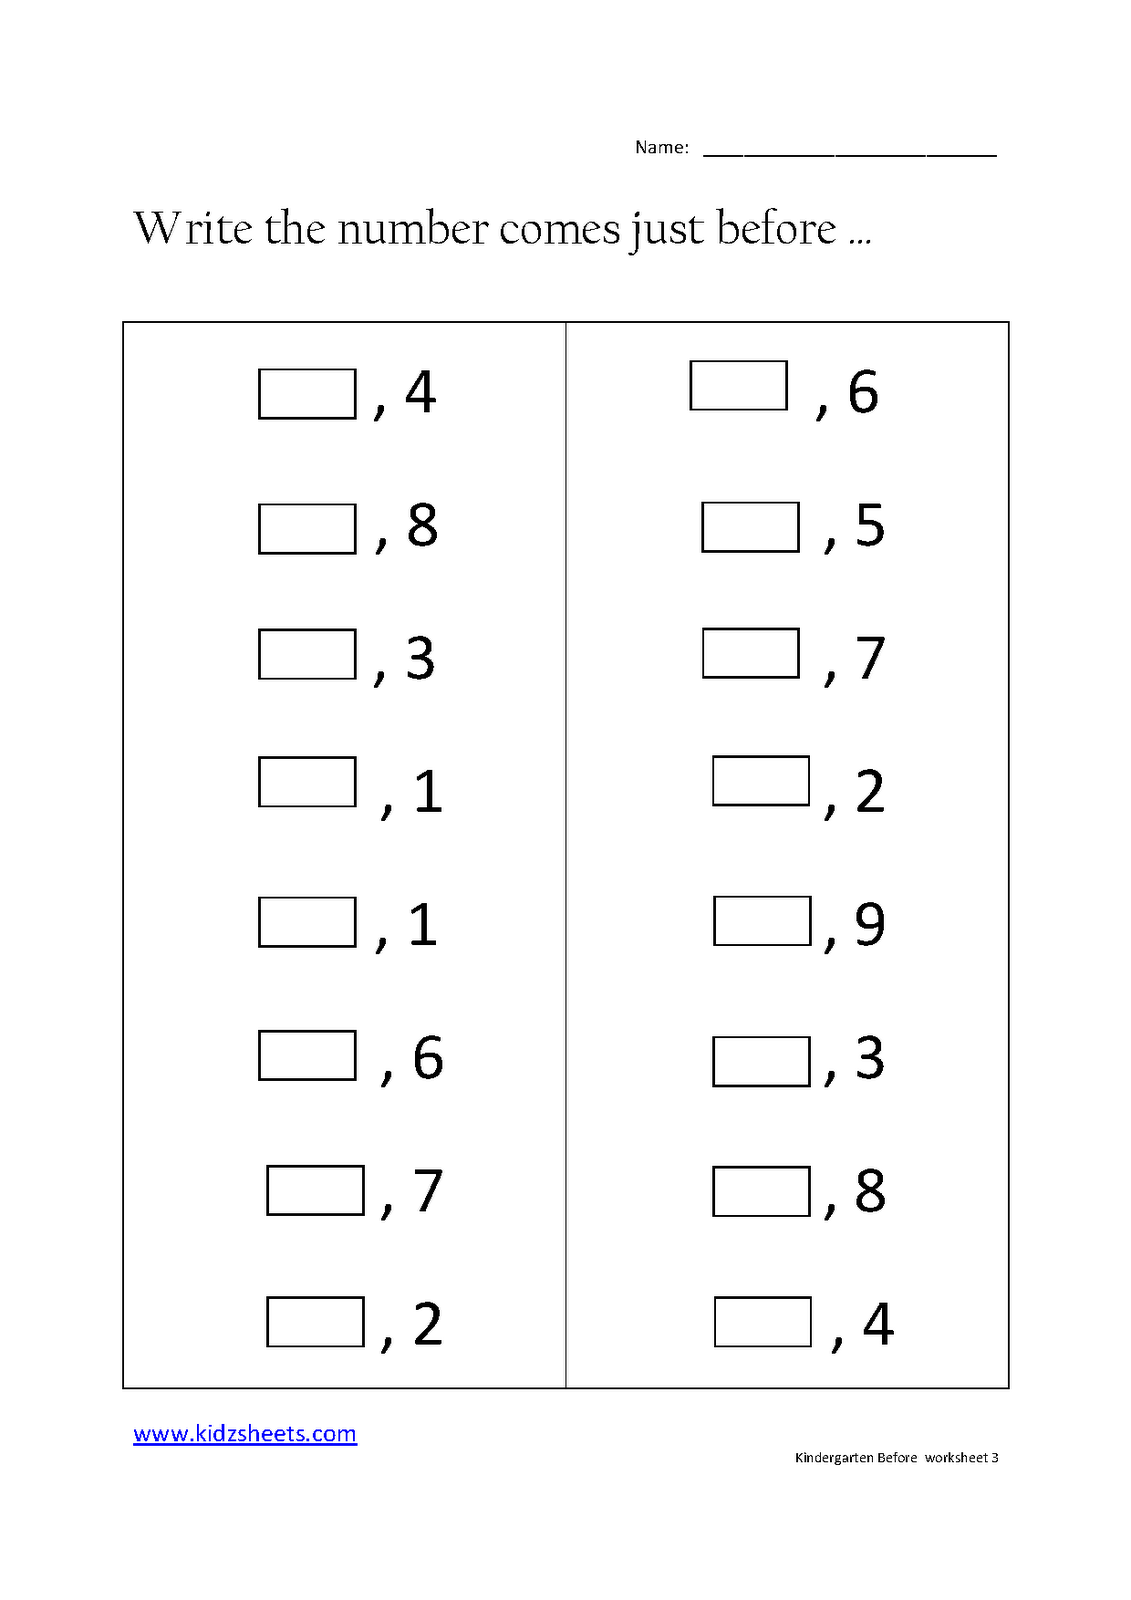 14-before-and-after-numbers-1-100-worksheets-worksheeto